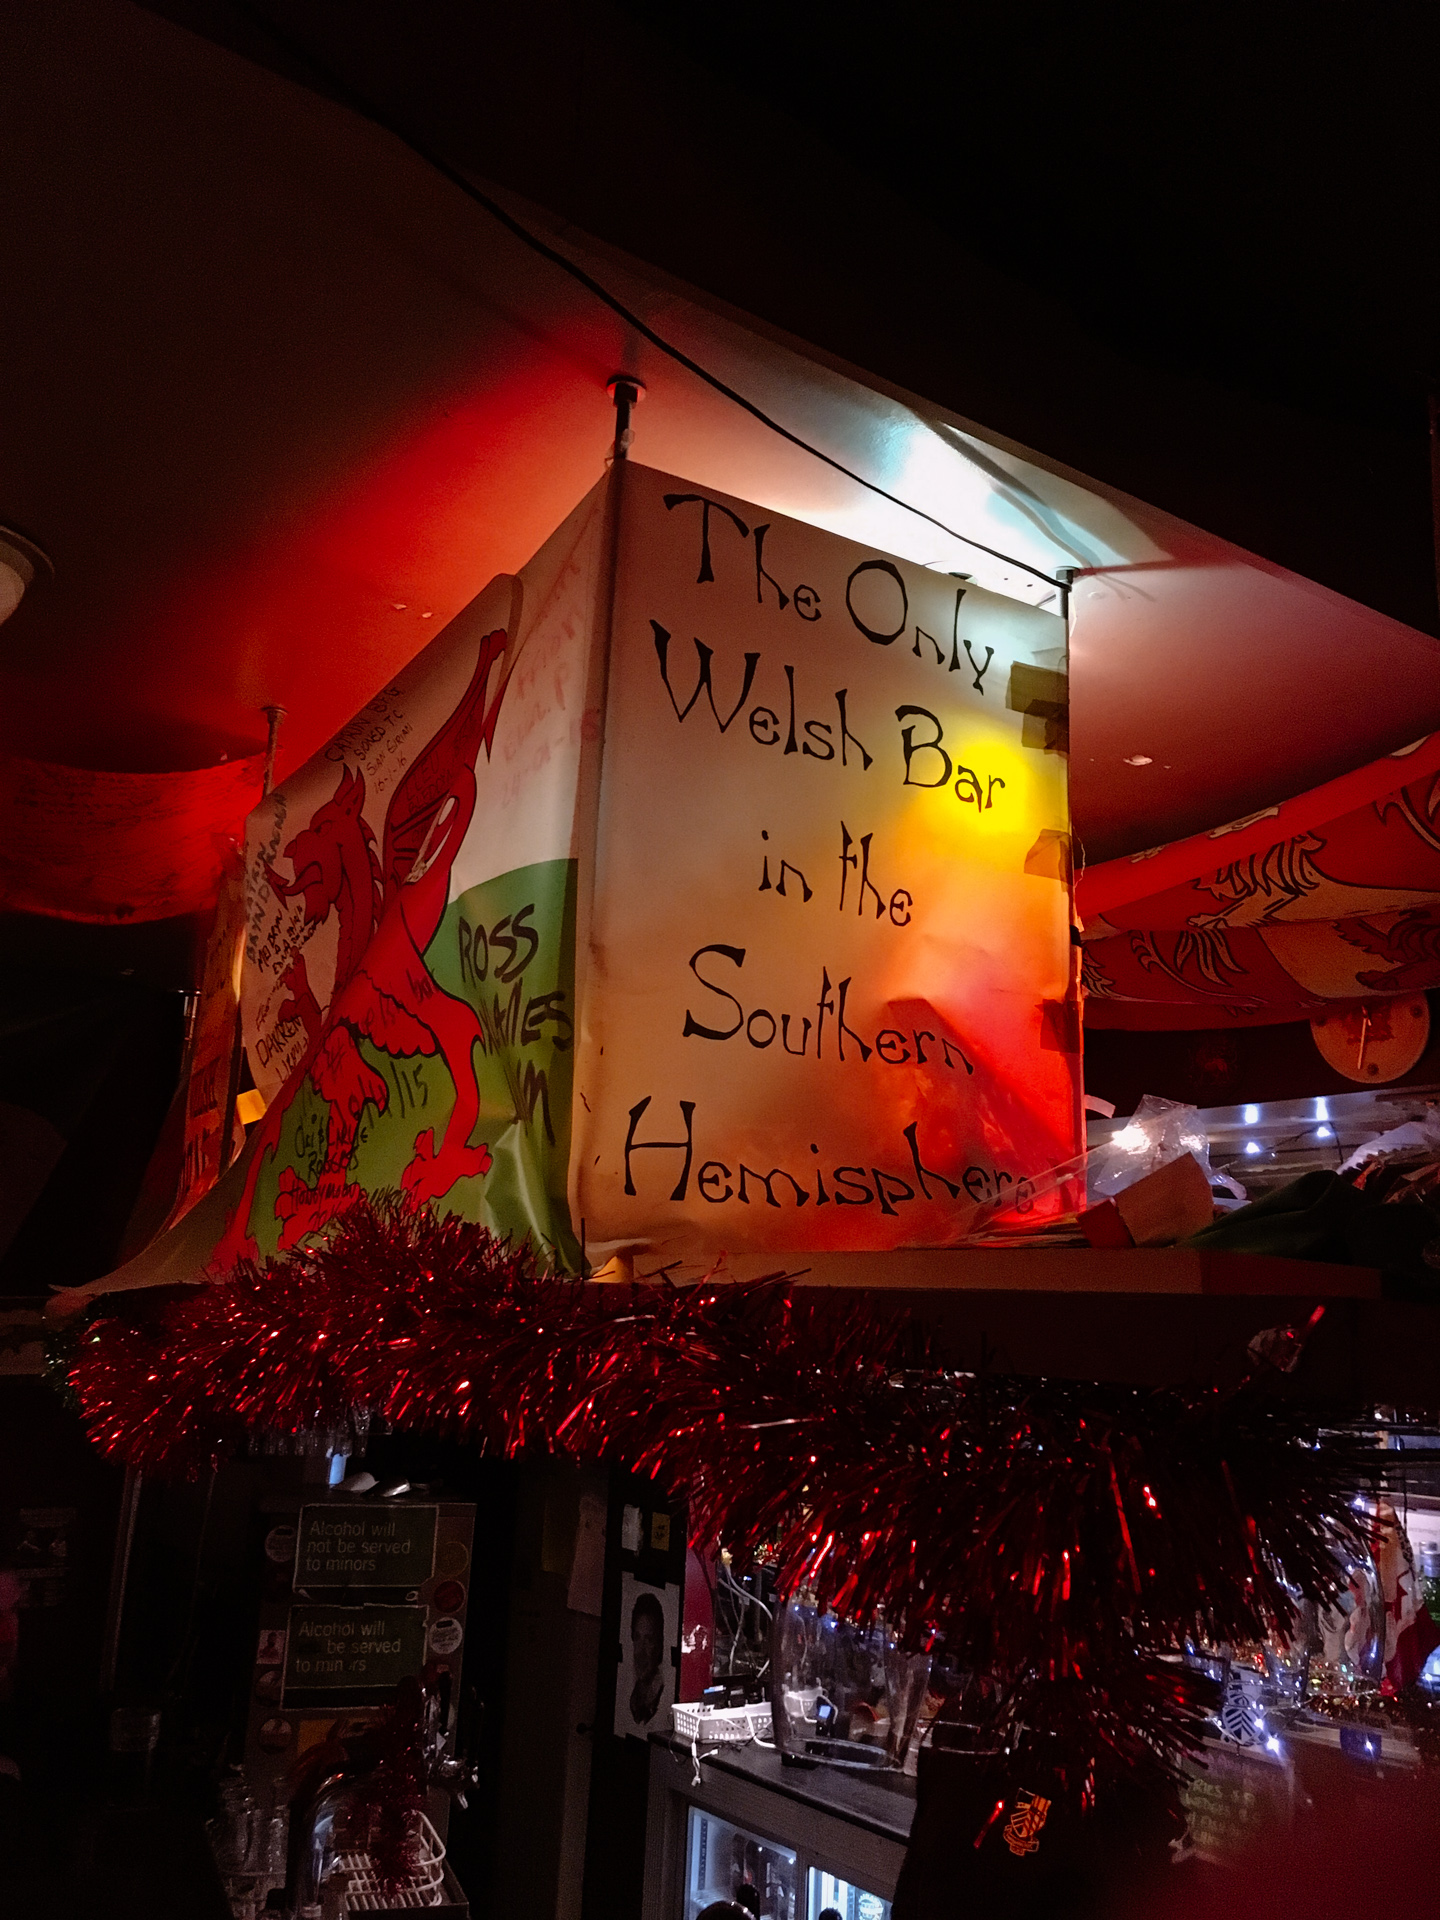 The only welsh pub in the Southern Hemisphere - Wellington, New Zealand